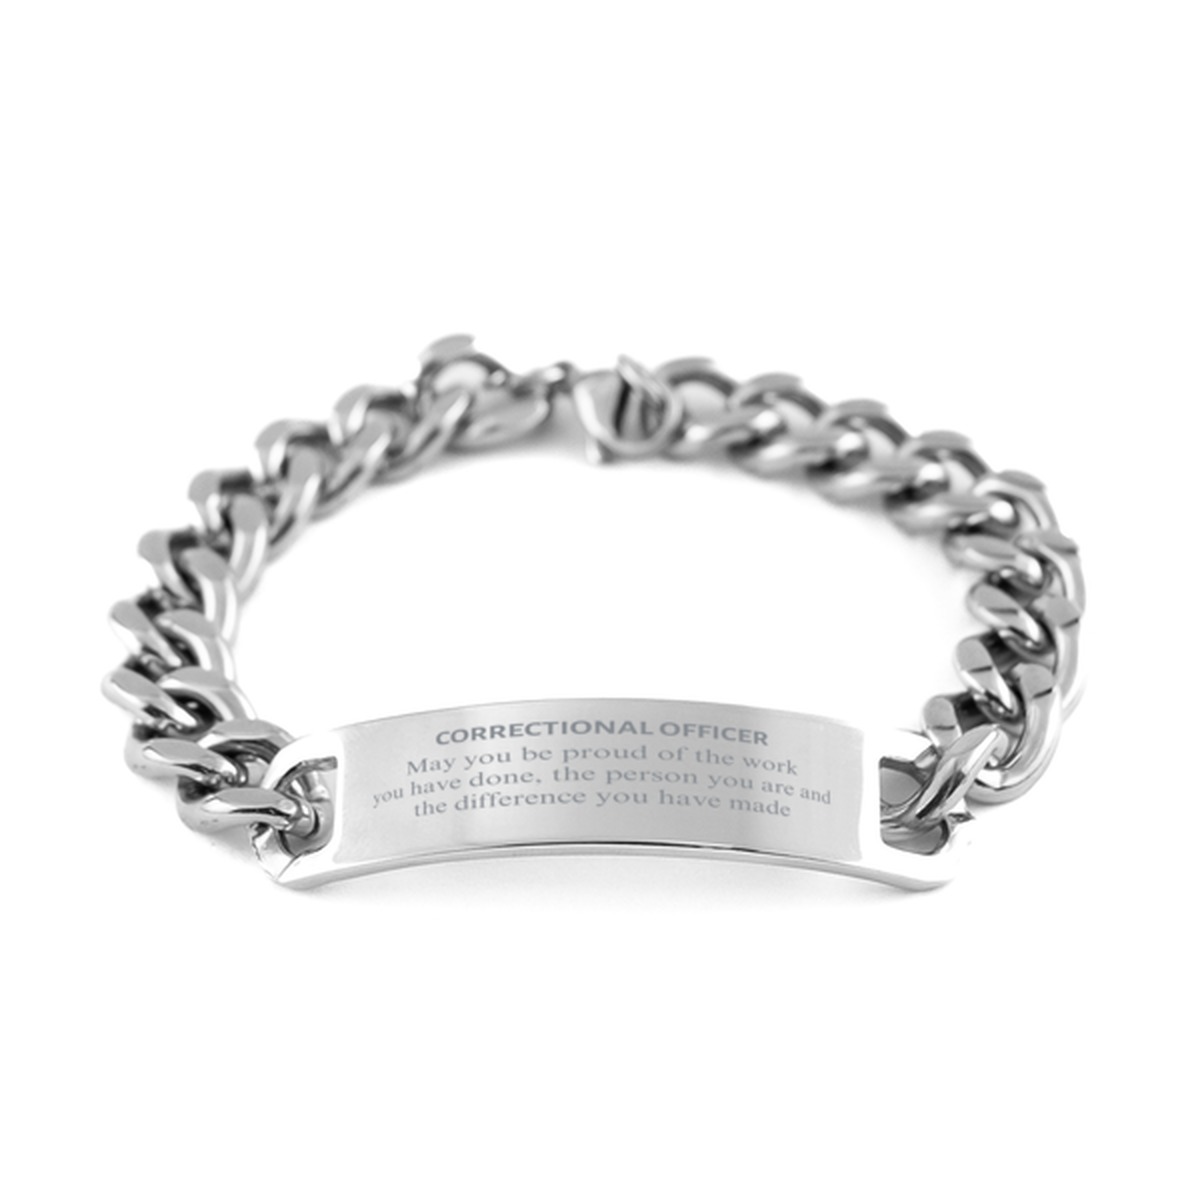 Correctional Officer May you be proud of the work you have done, Retirement Correctional Officer Cuban Chain Stainless Steel Bracelet for Colleague Appreciation Gifts Amazing for Correctional Officer